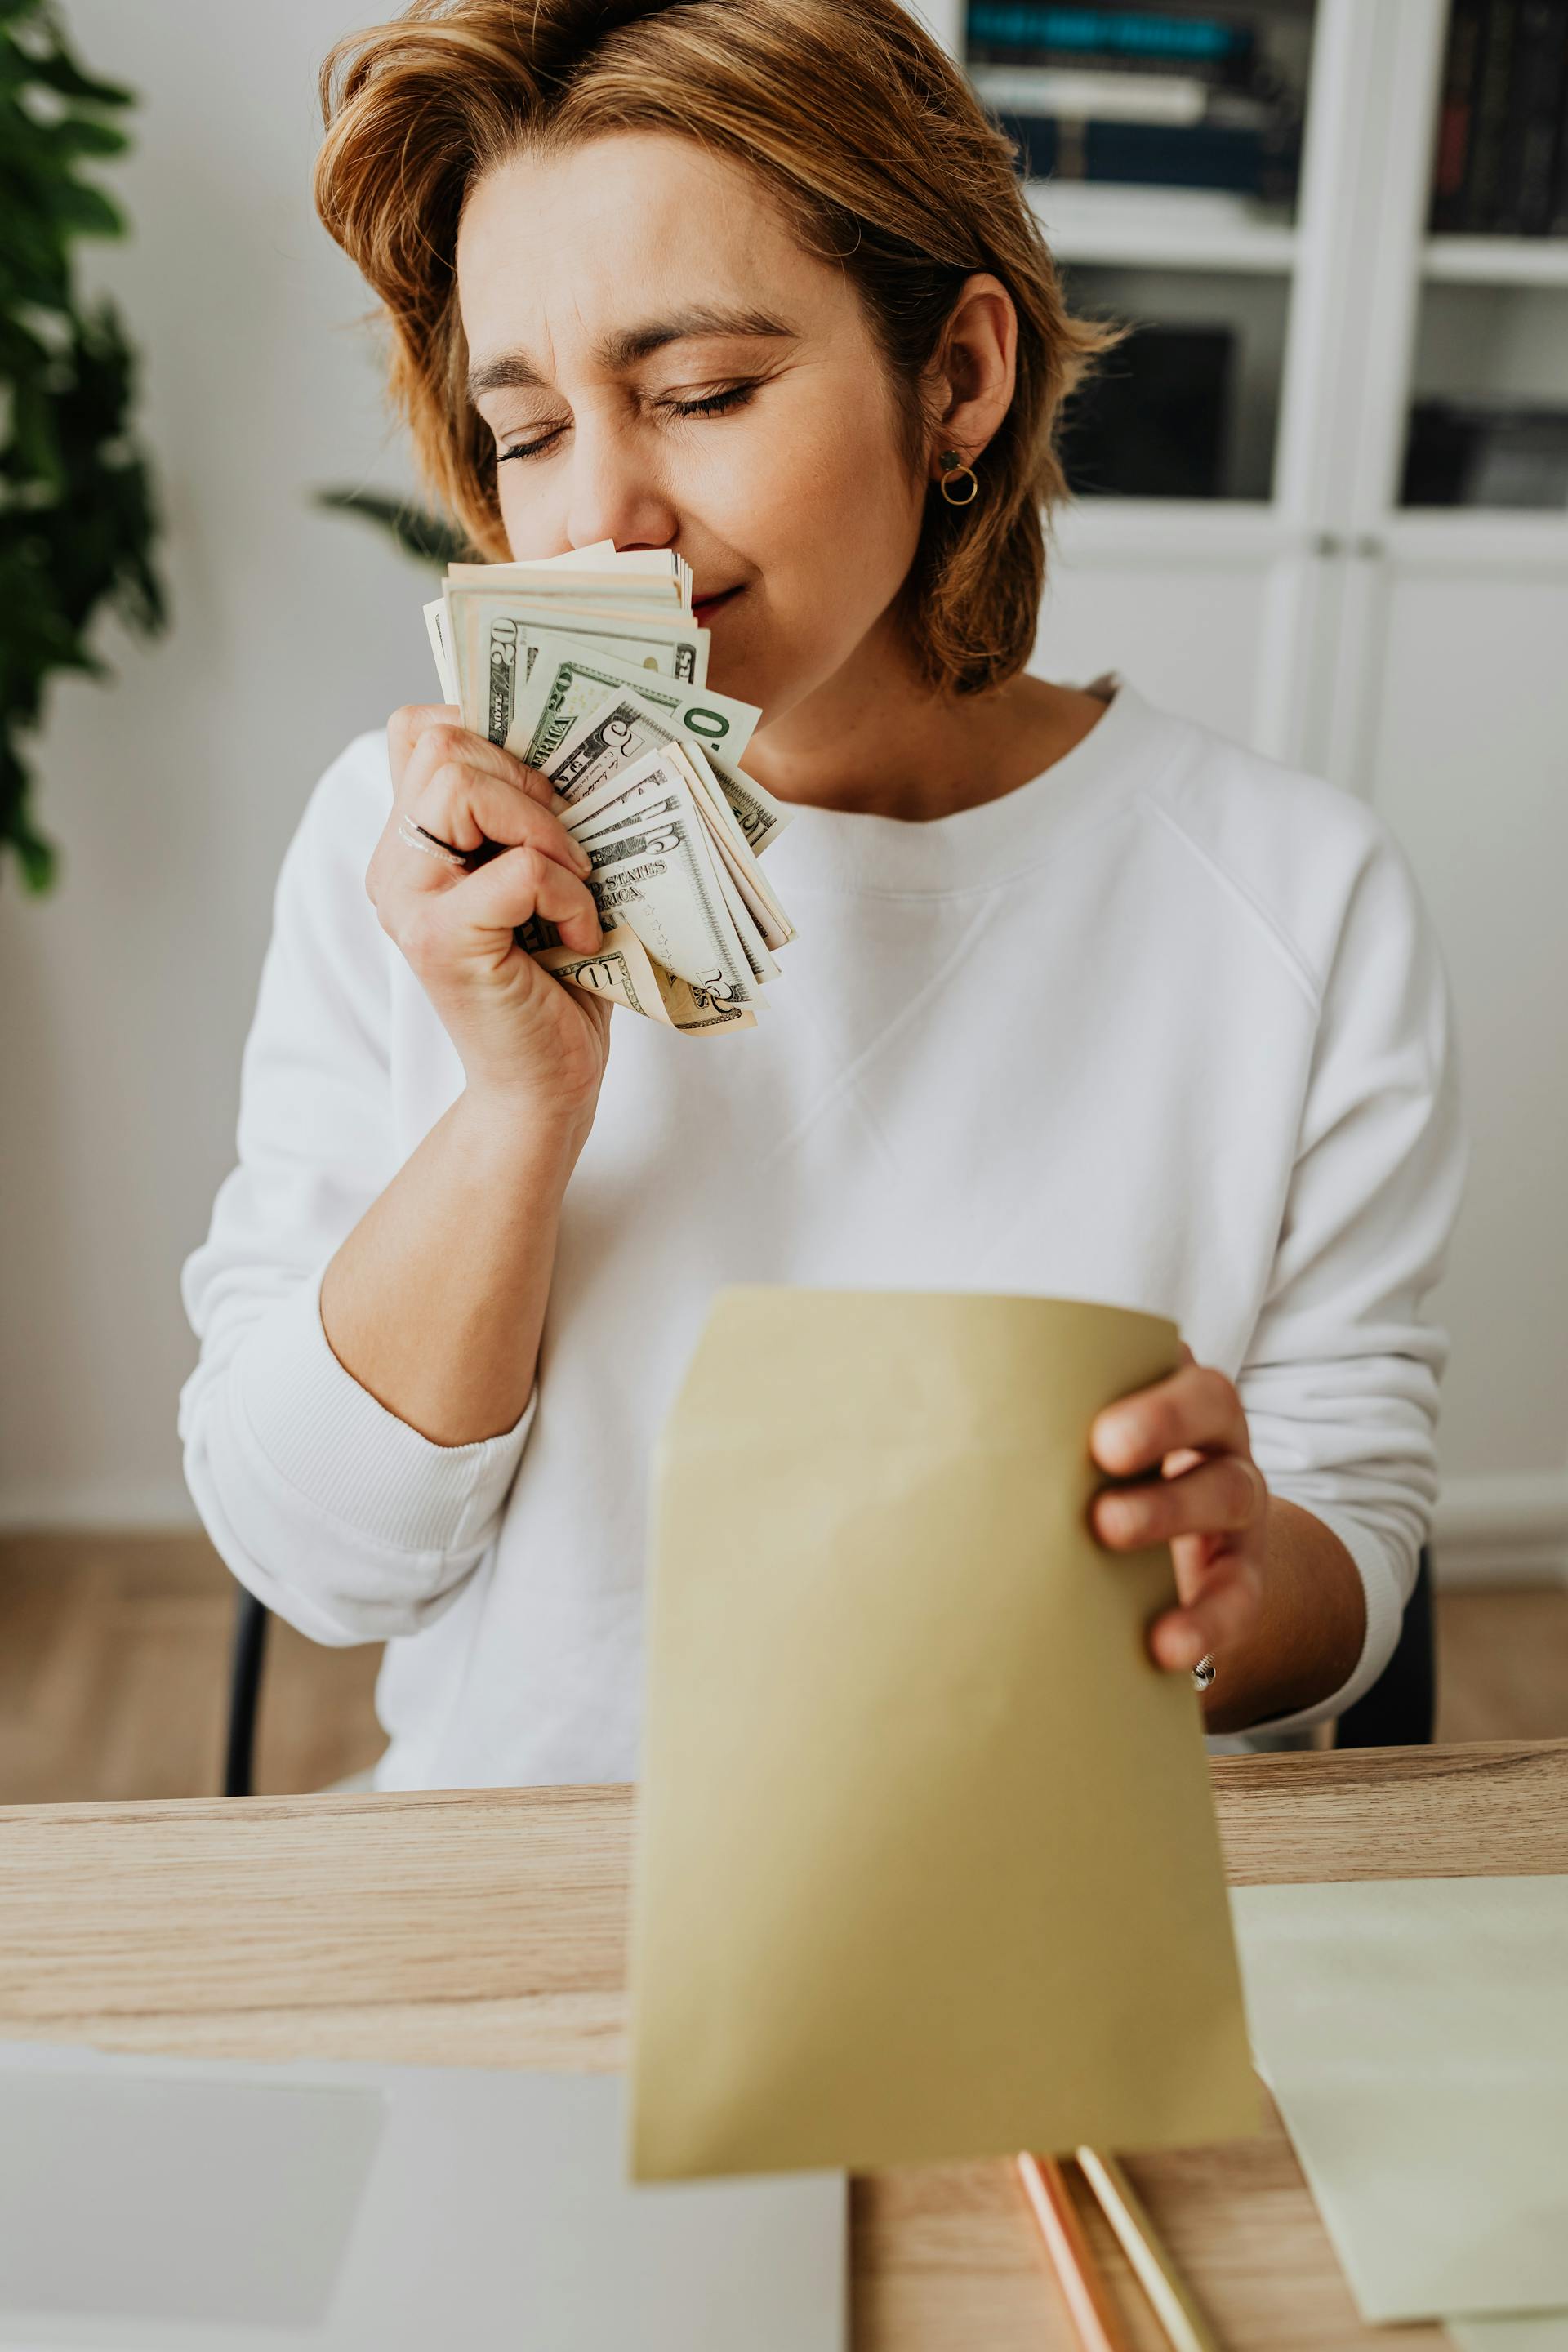 A woman smelling money with her eyes closed | Source: Pexels